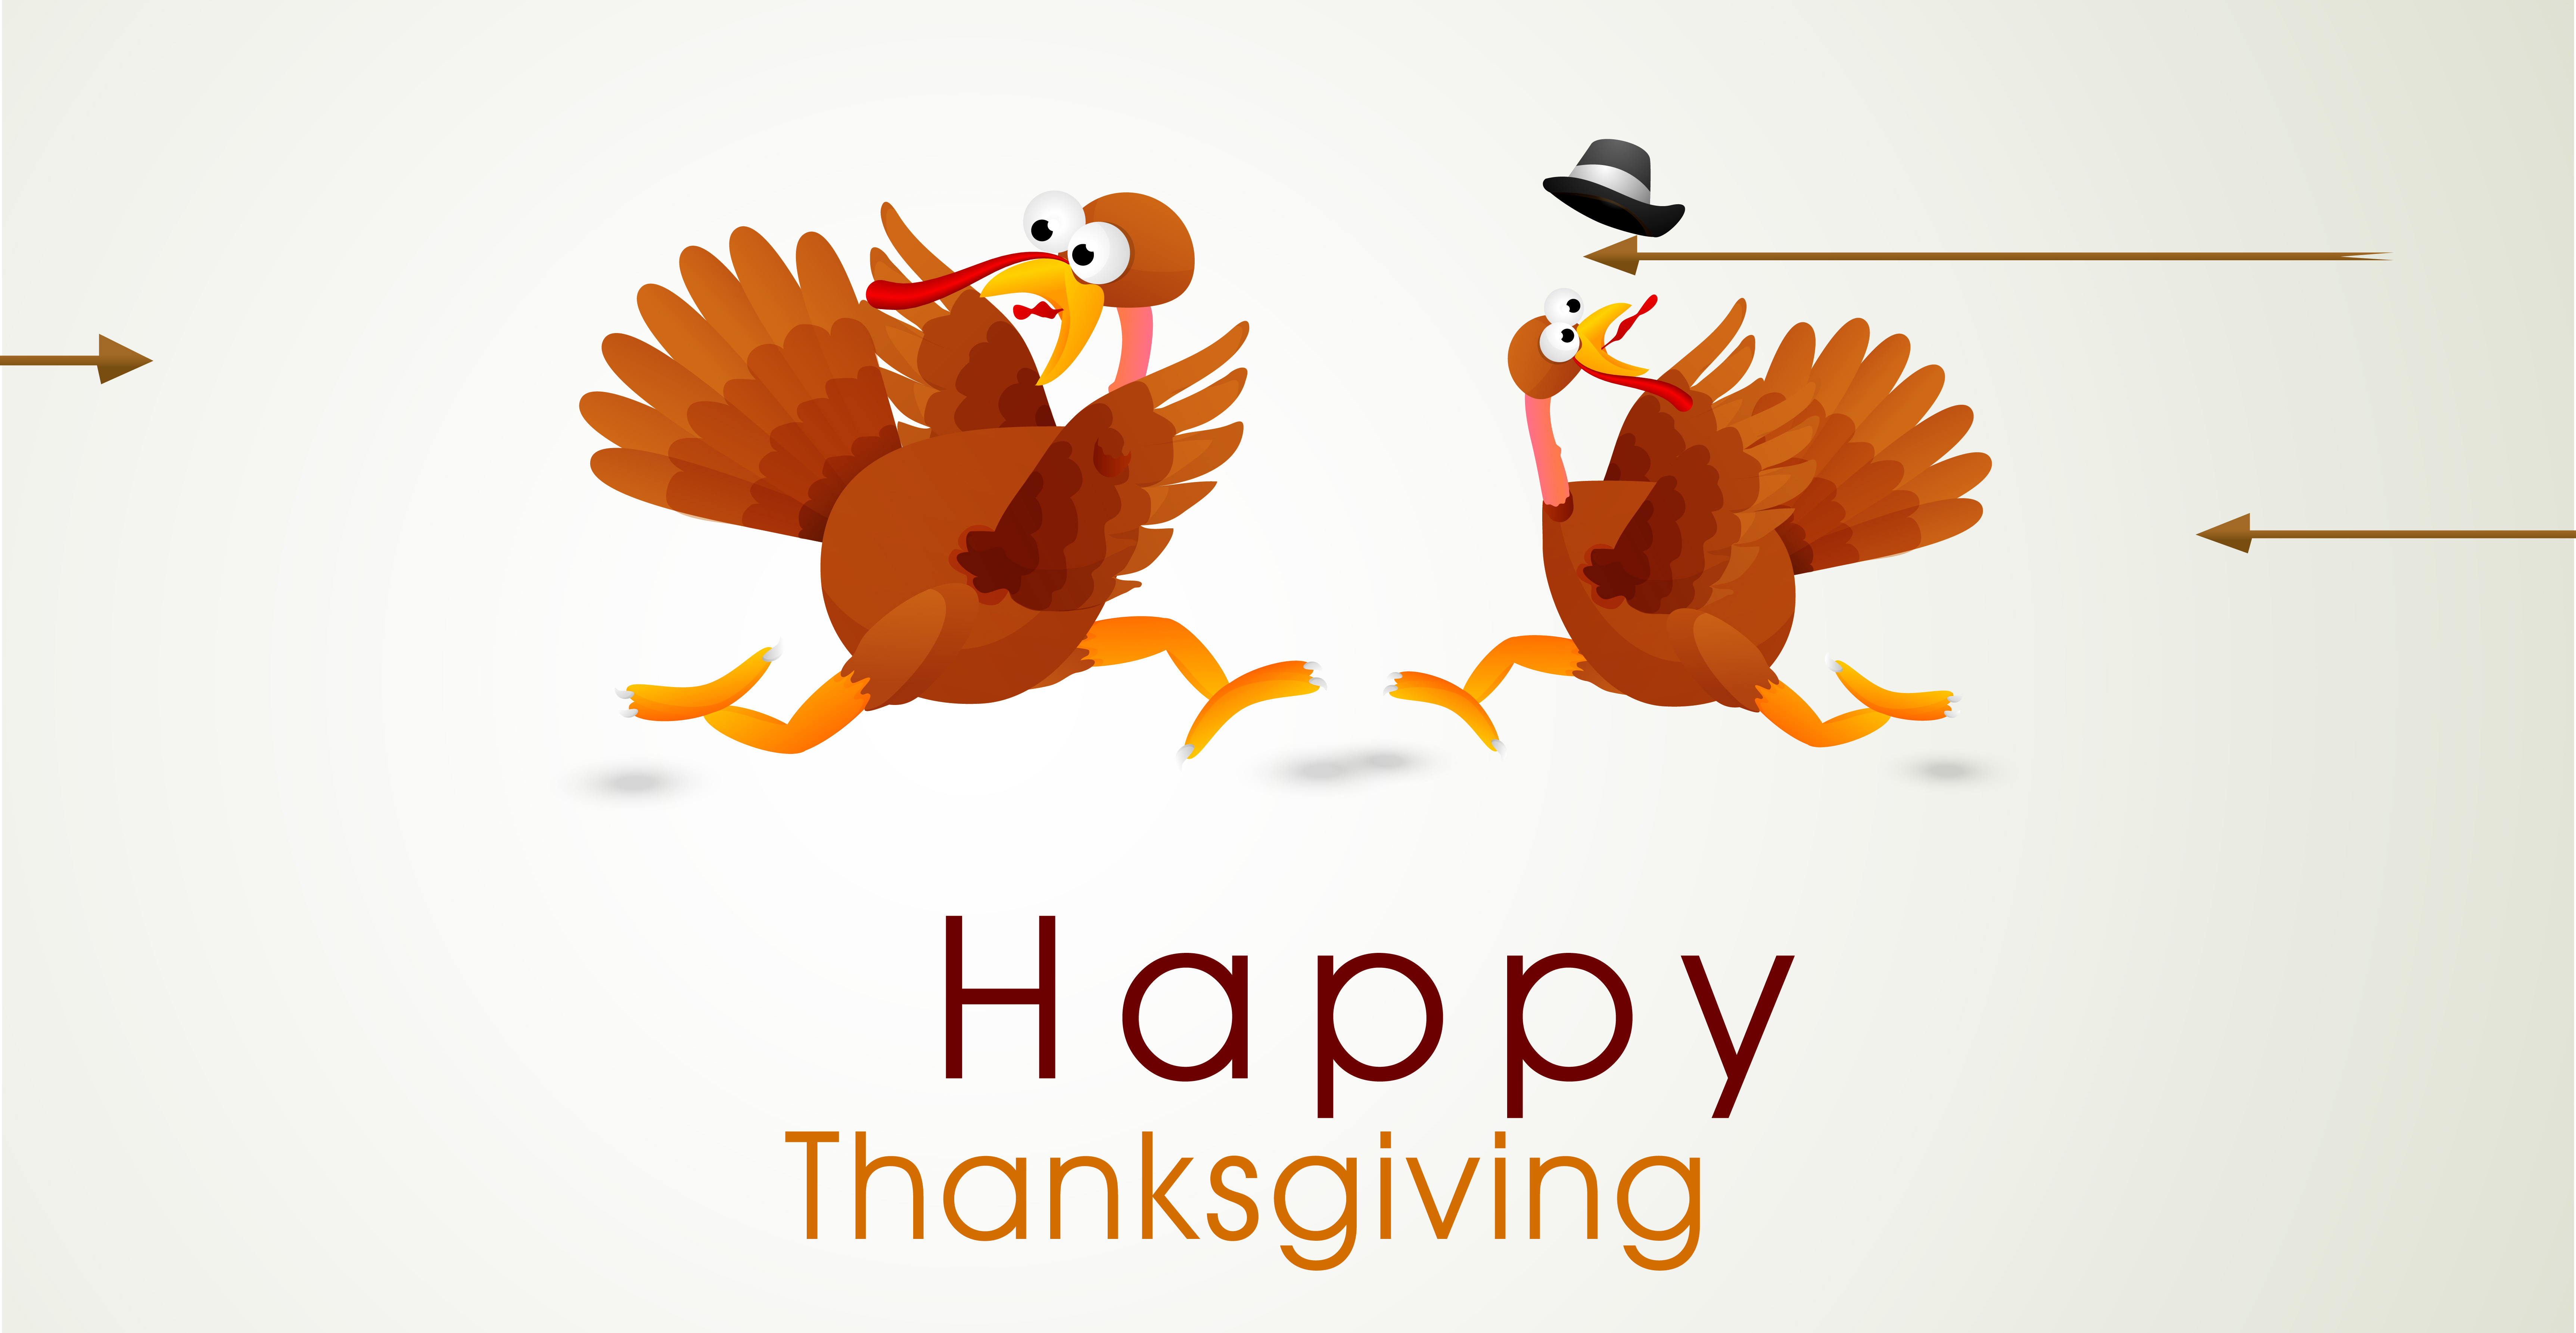 happy thanksgiving from the upstart group team